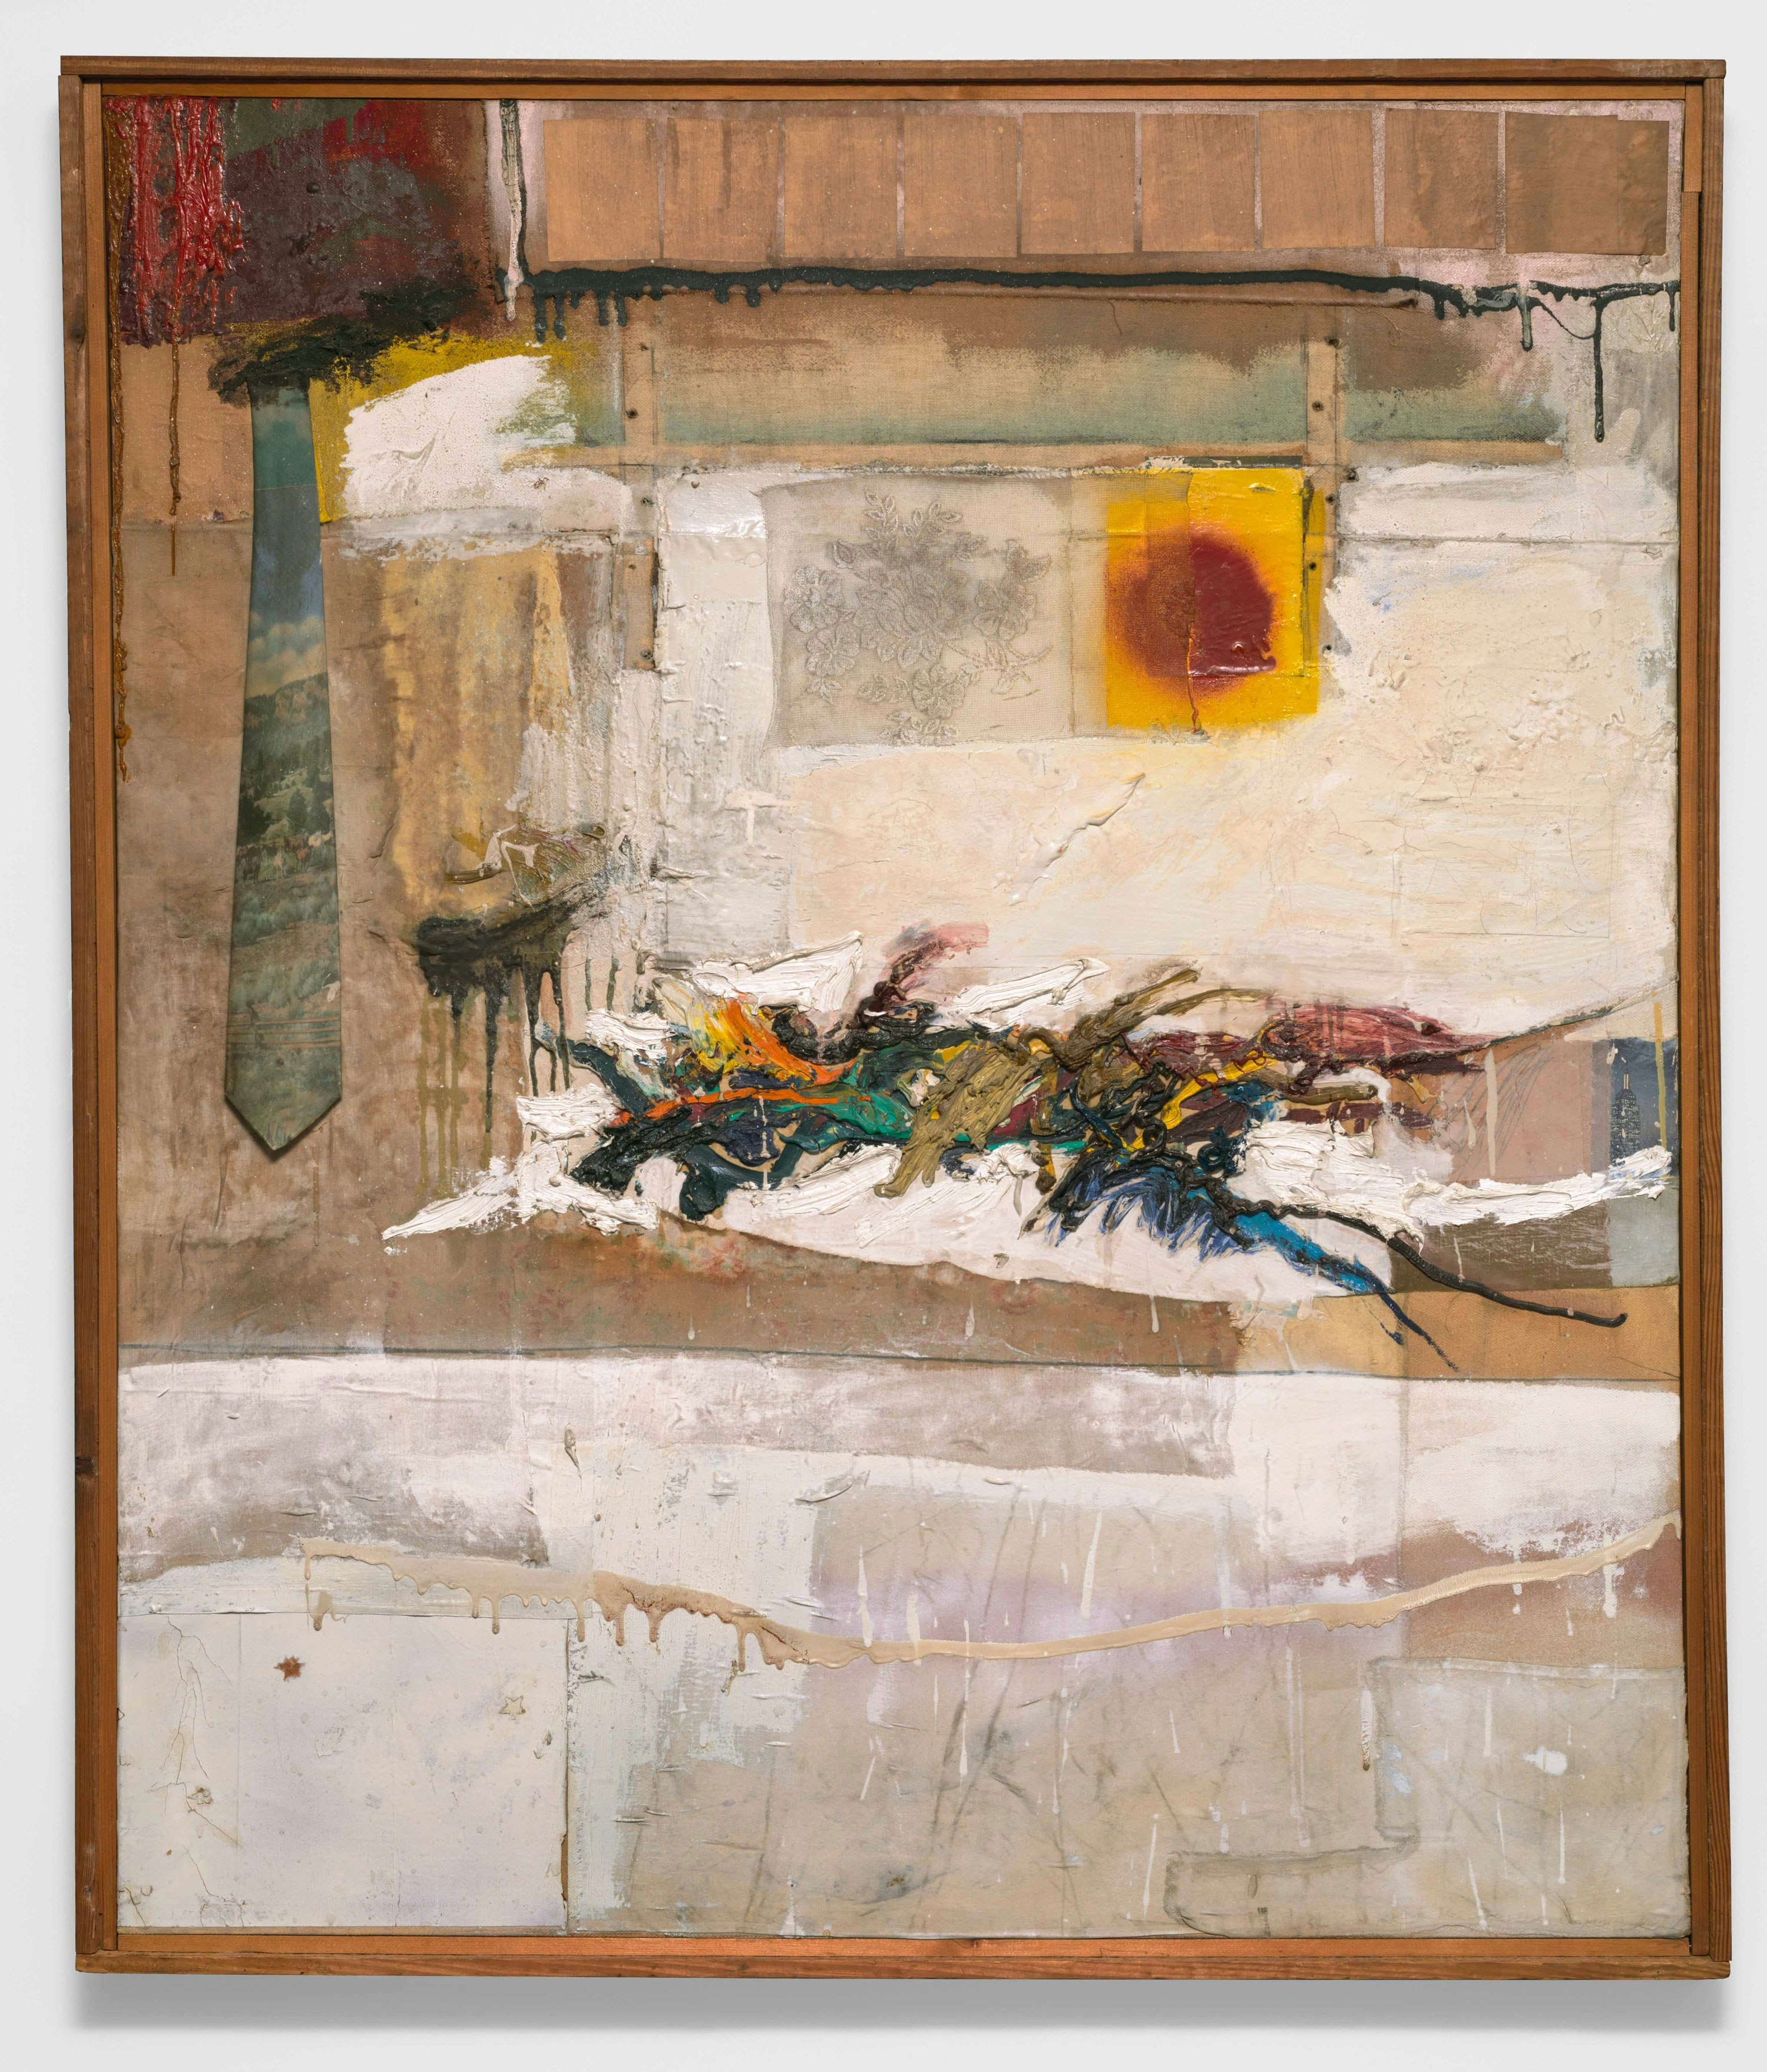 Robert Rauschenberg, <em>Rhyme</em>, 1956. Oil, fabric, necktie, paper, enamel, pencil, and synthetic polymer paint on canvas, 48 1/4 x 41 1/8 inches. Courtesy Craig Starr and The Museum of Modern Art.